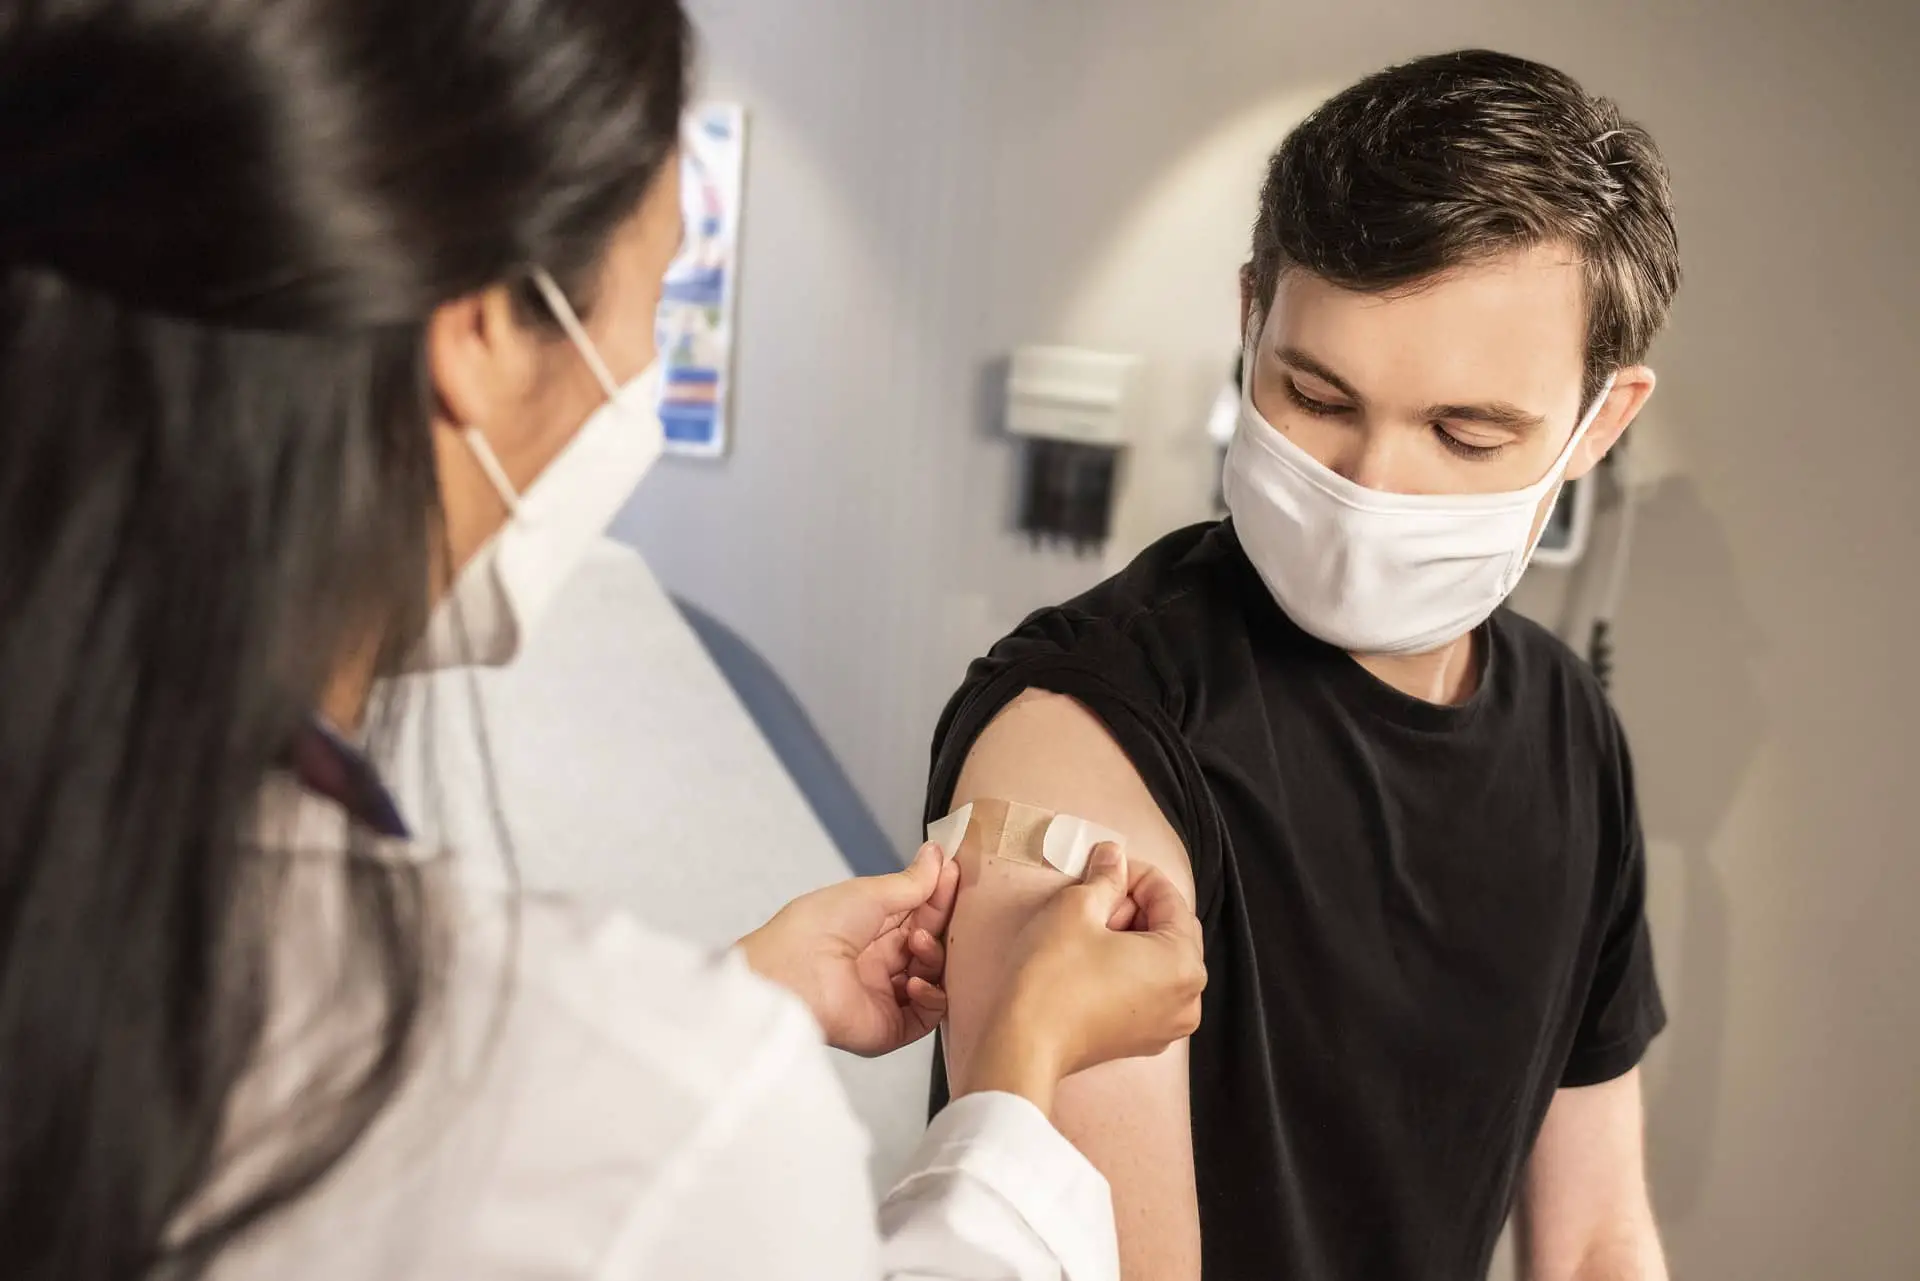 Young man having plaster applied after being vaccinated - by CDC